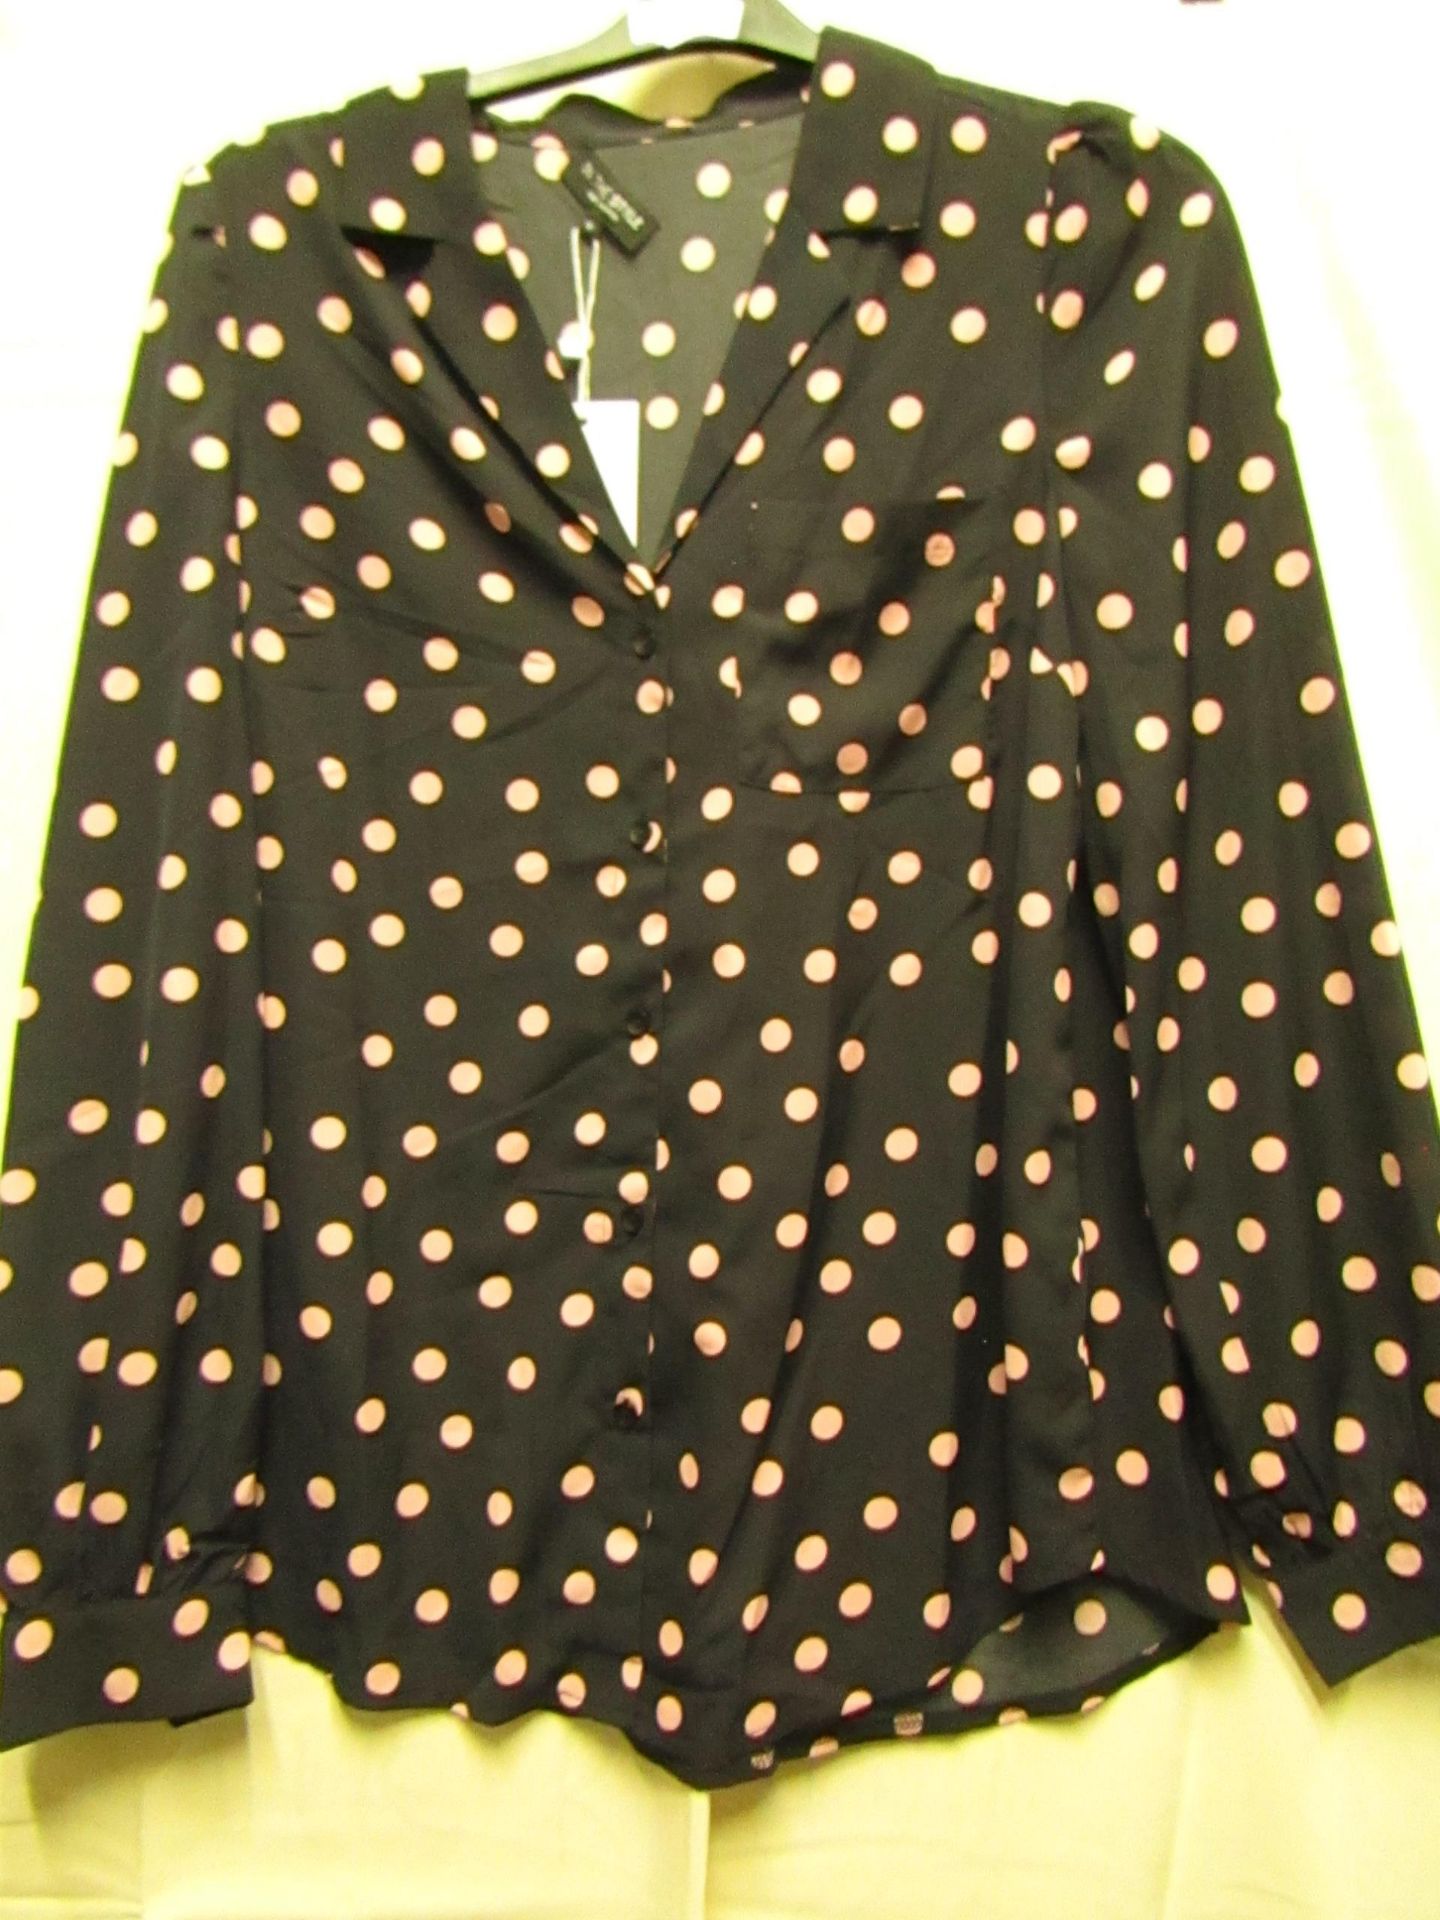 In The Style Blouse Black With Pink Dots Size 12 ( Although New With Tags The Label Has Come Off )